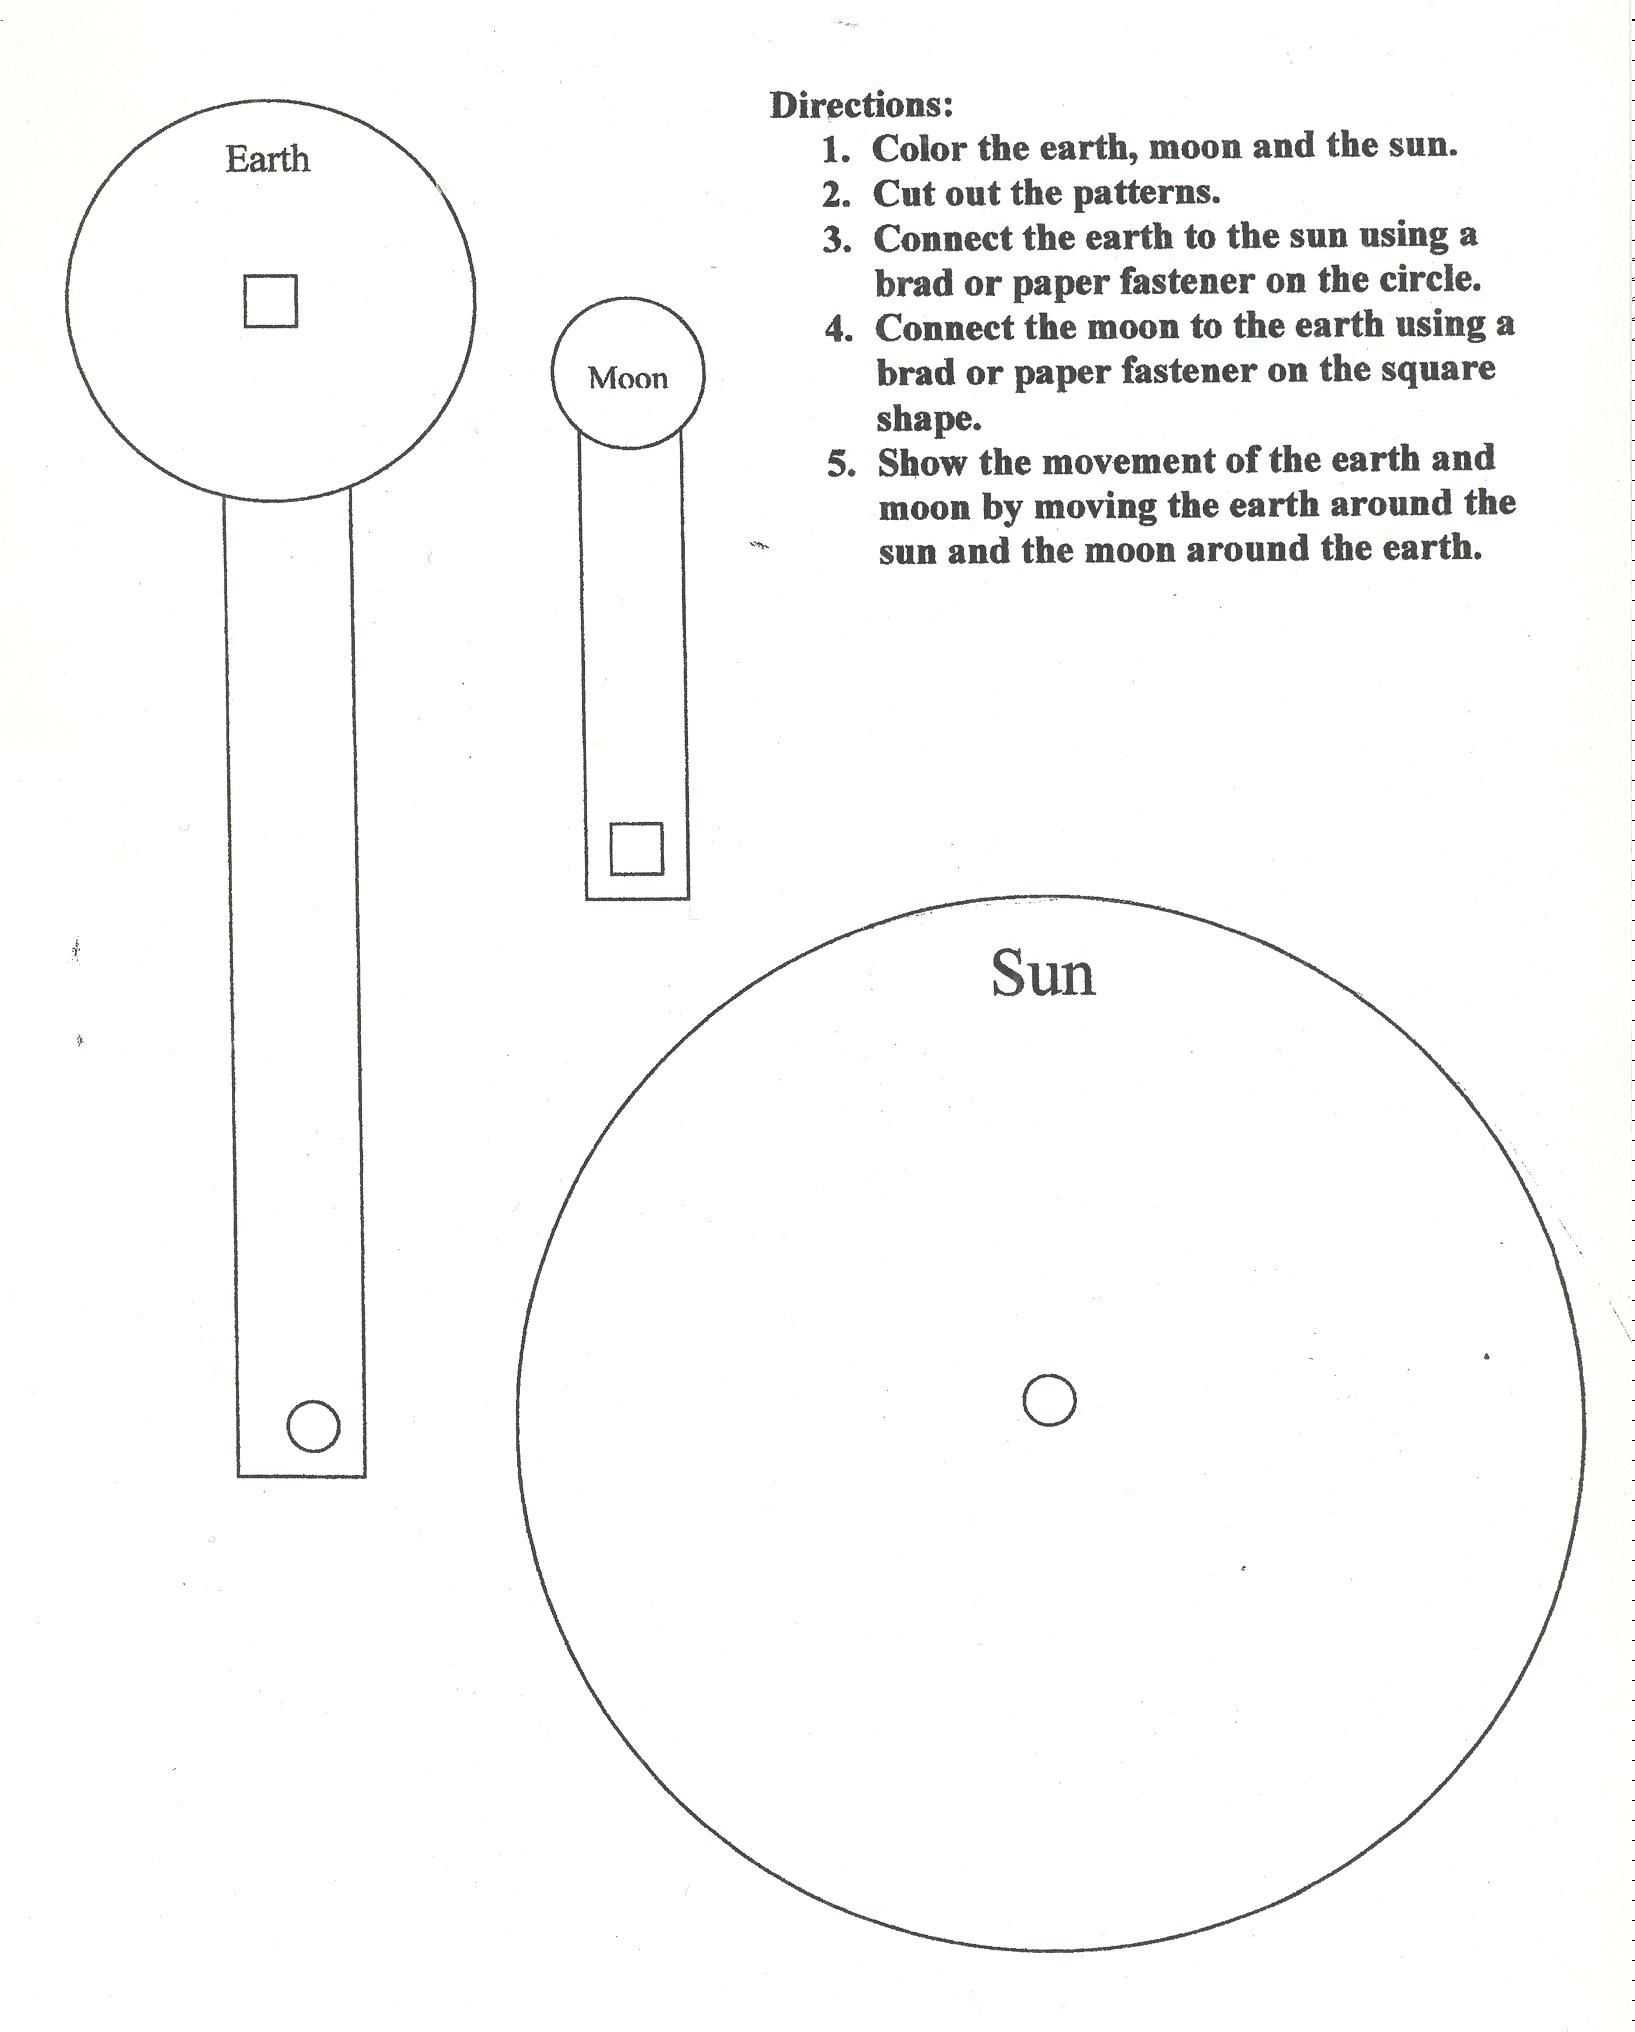 Relative Dating Worksheet Pdf Along with Sun Earth Moon System with Tidal Bulges From Nasa Cool yet Crafty